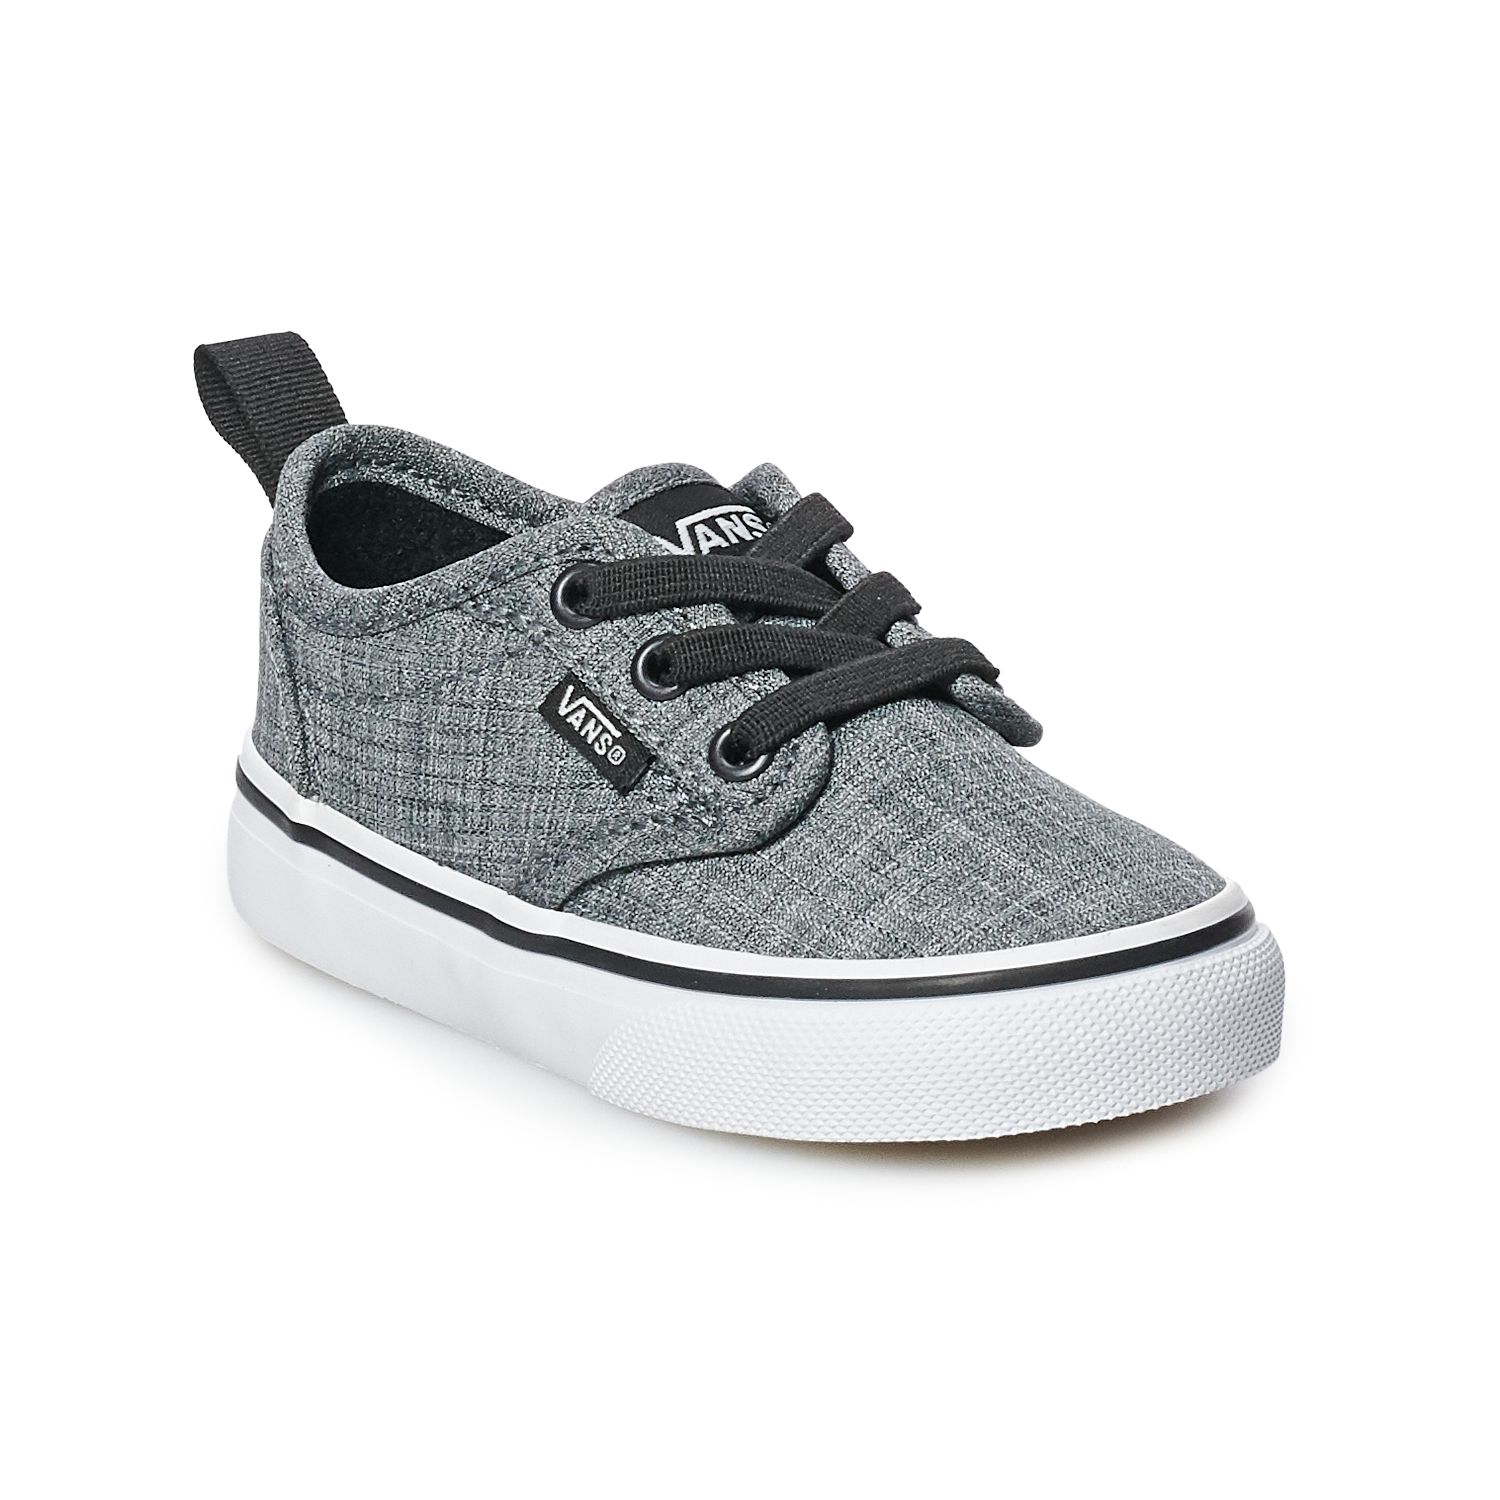 grey vans for toddlers